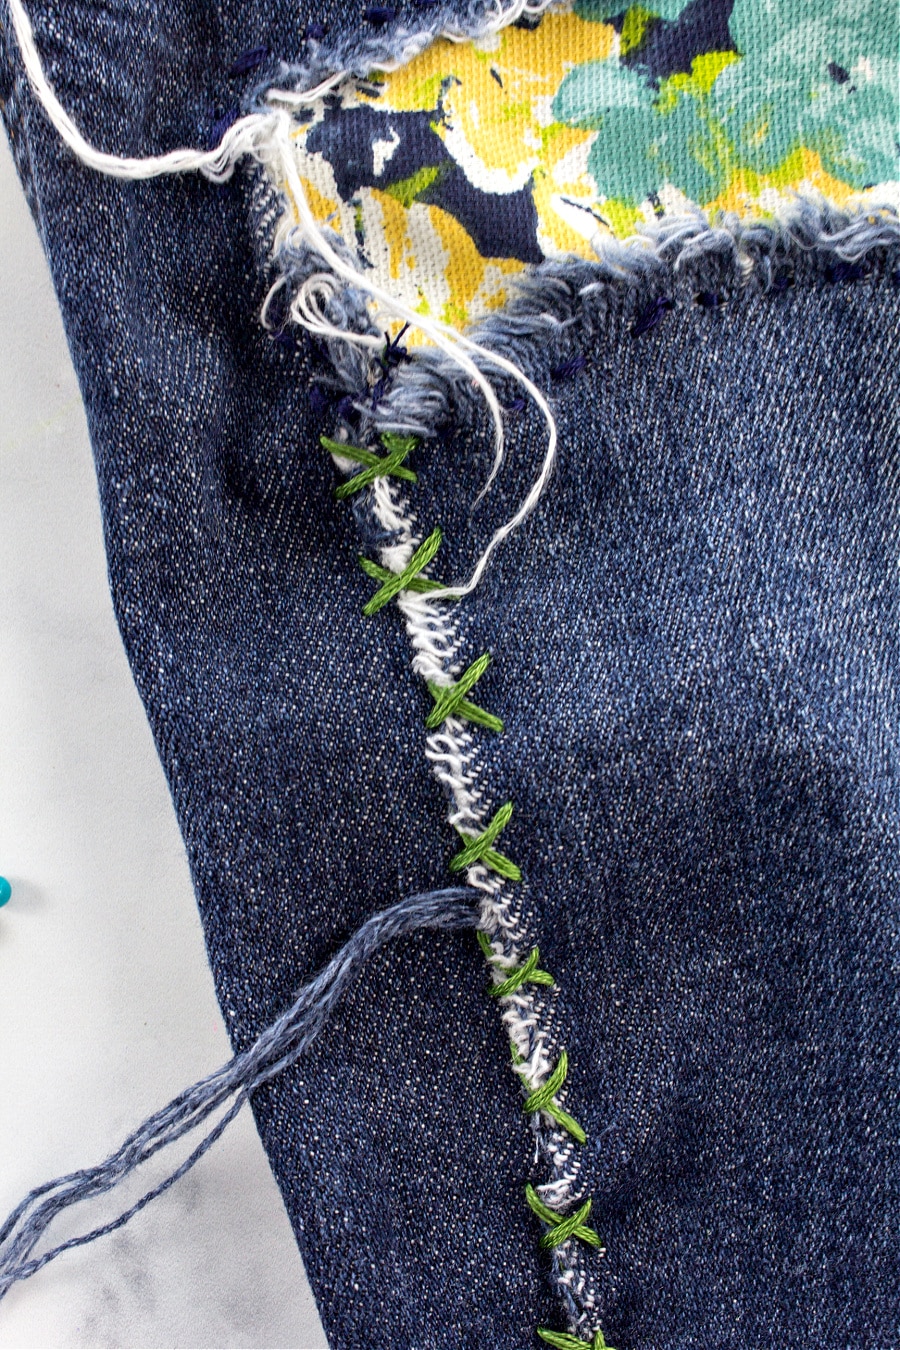 A tear in denim jeans being repaired by sewing crosses using embroidery thread.